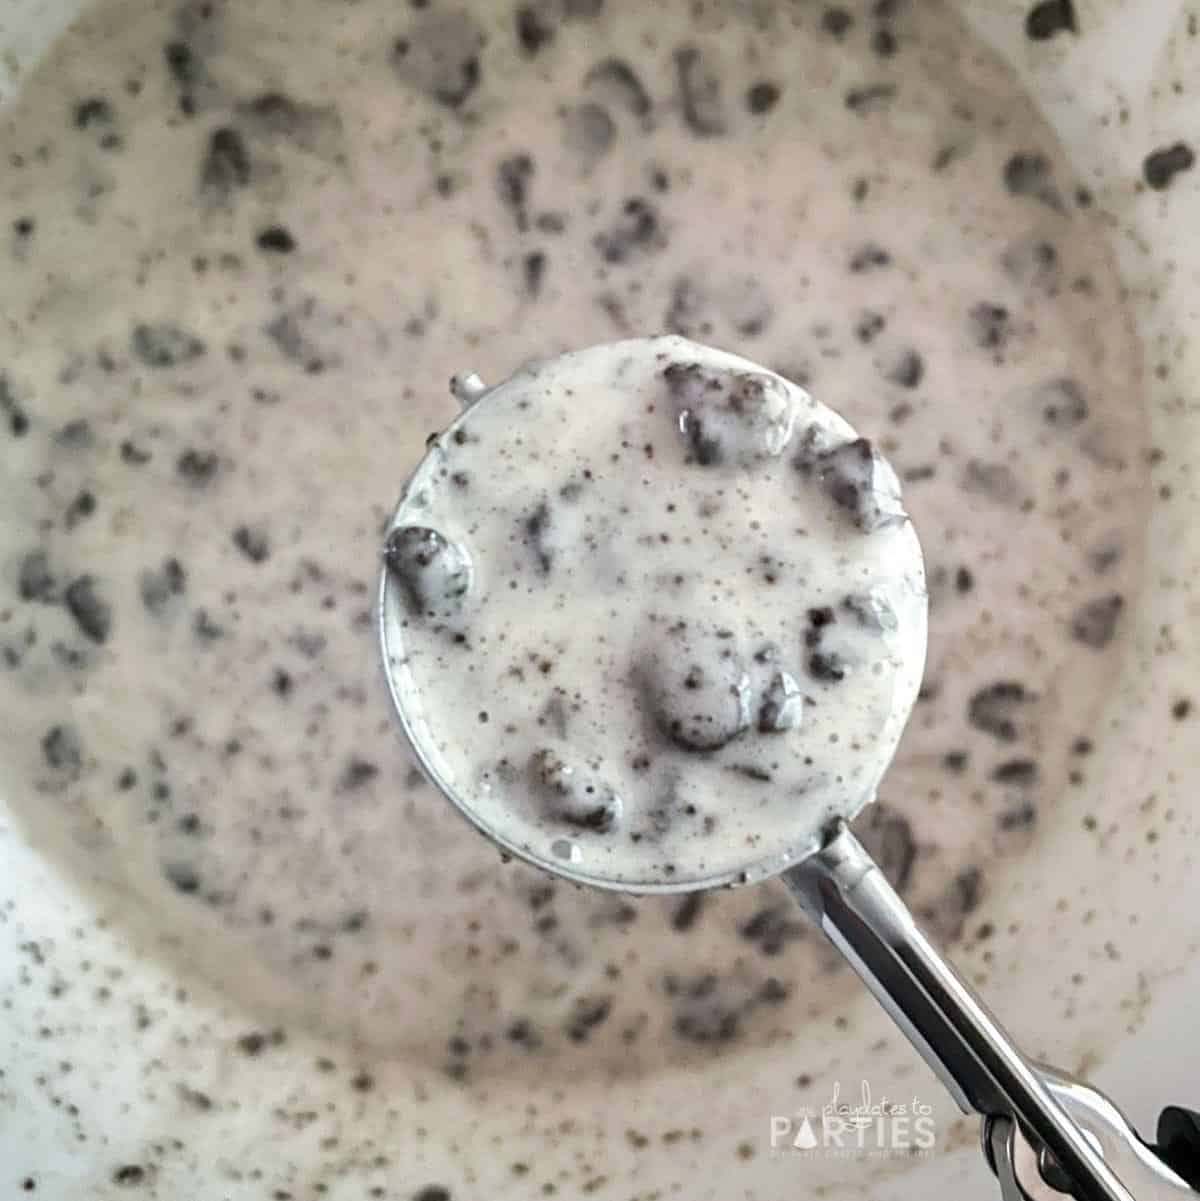 Scooping Oreo Cupcake Batter with a Cookie Scoop.